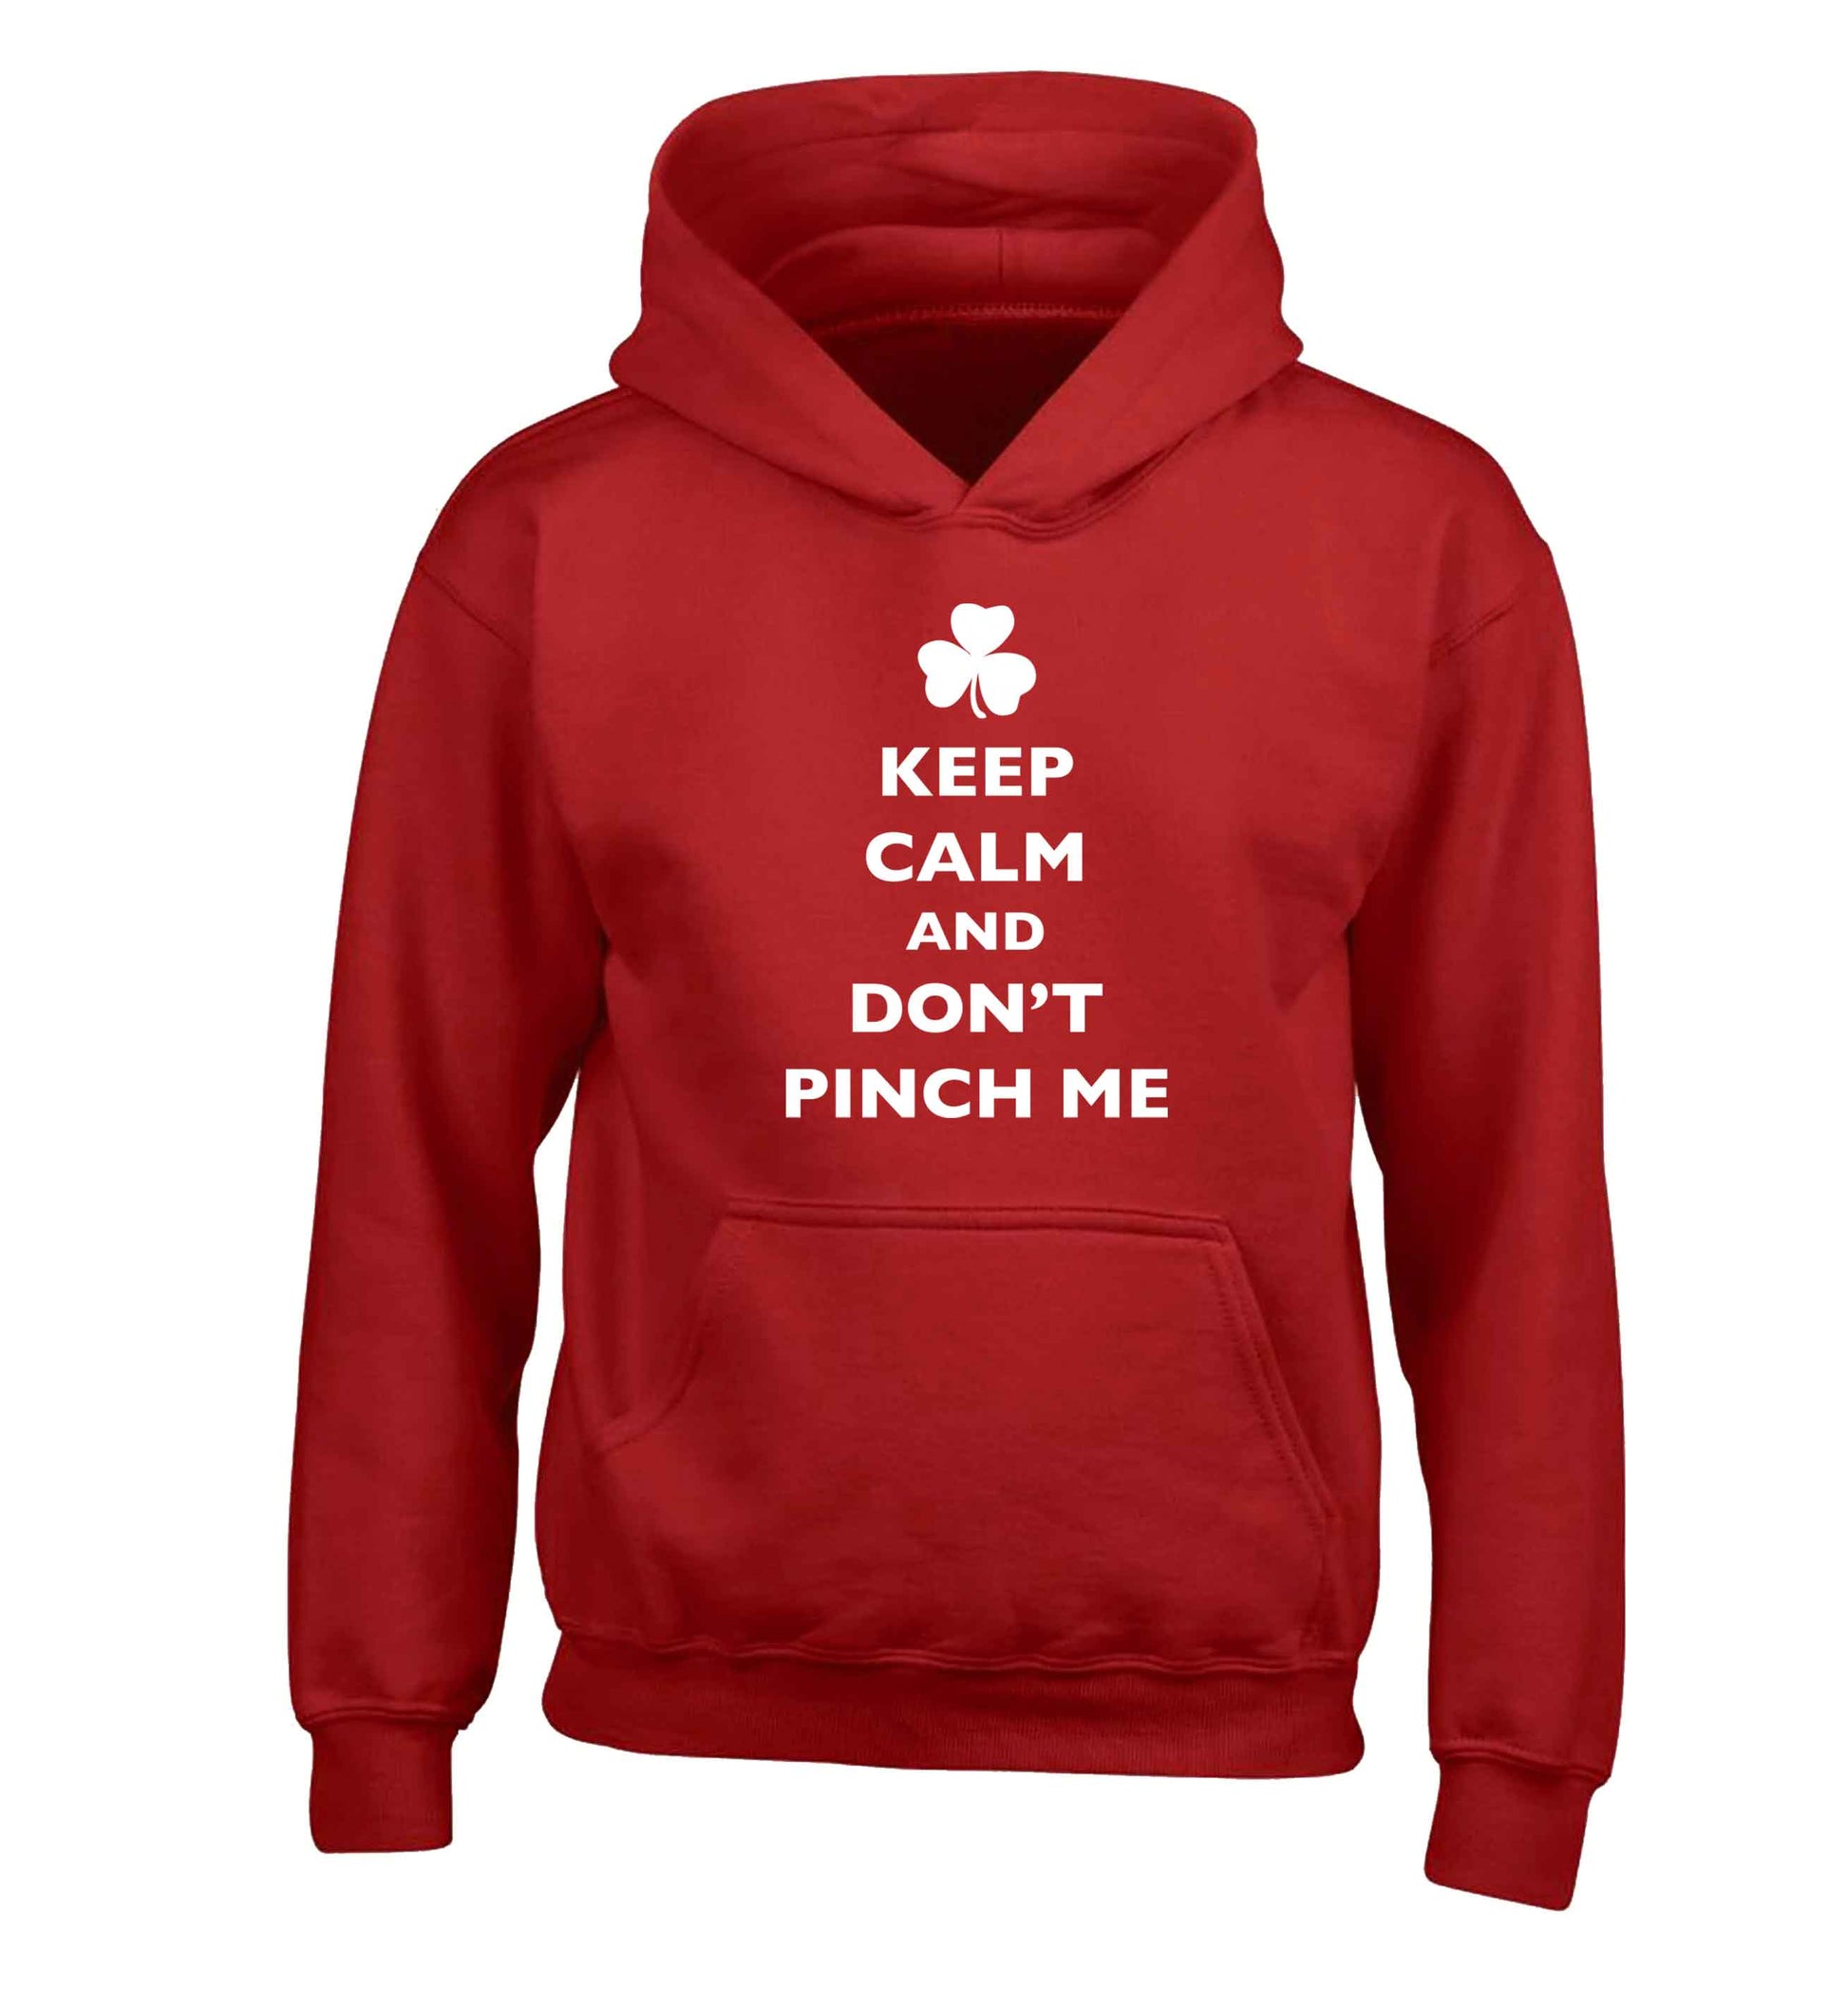 Keep calm and don't pinch me children's red hoodie 12-13 Years